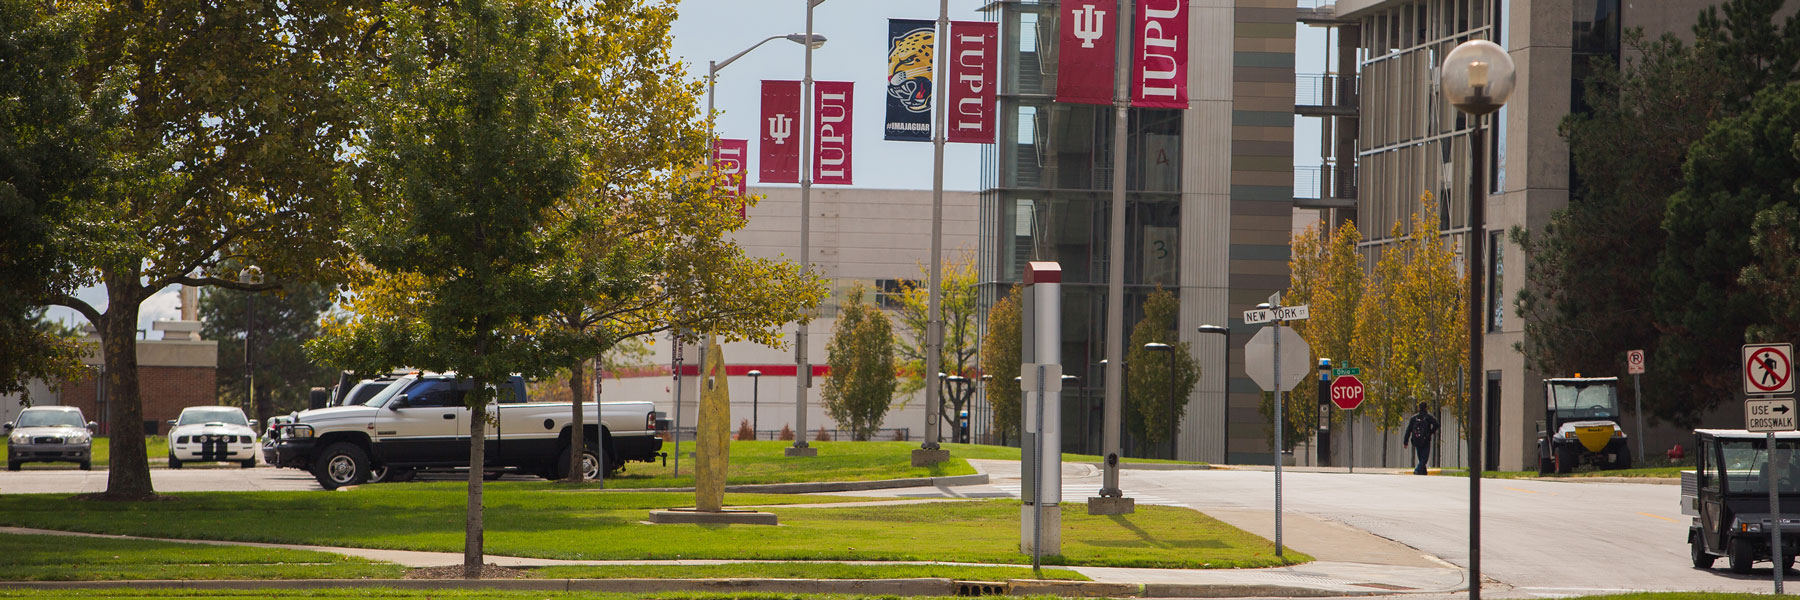 outside view of IUPUI parking garage 